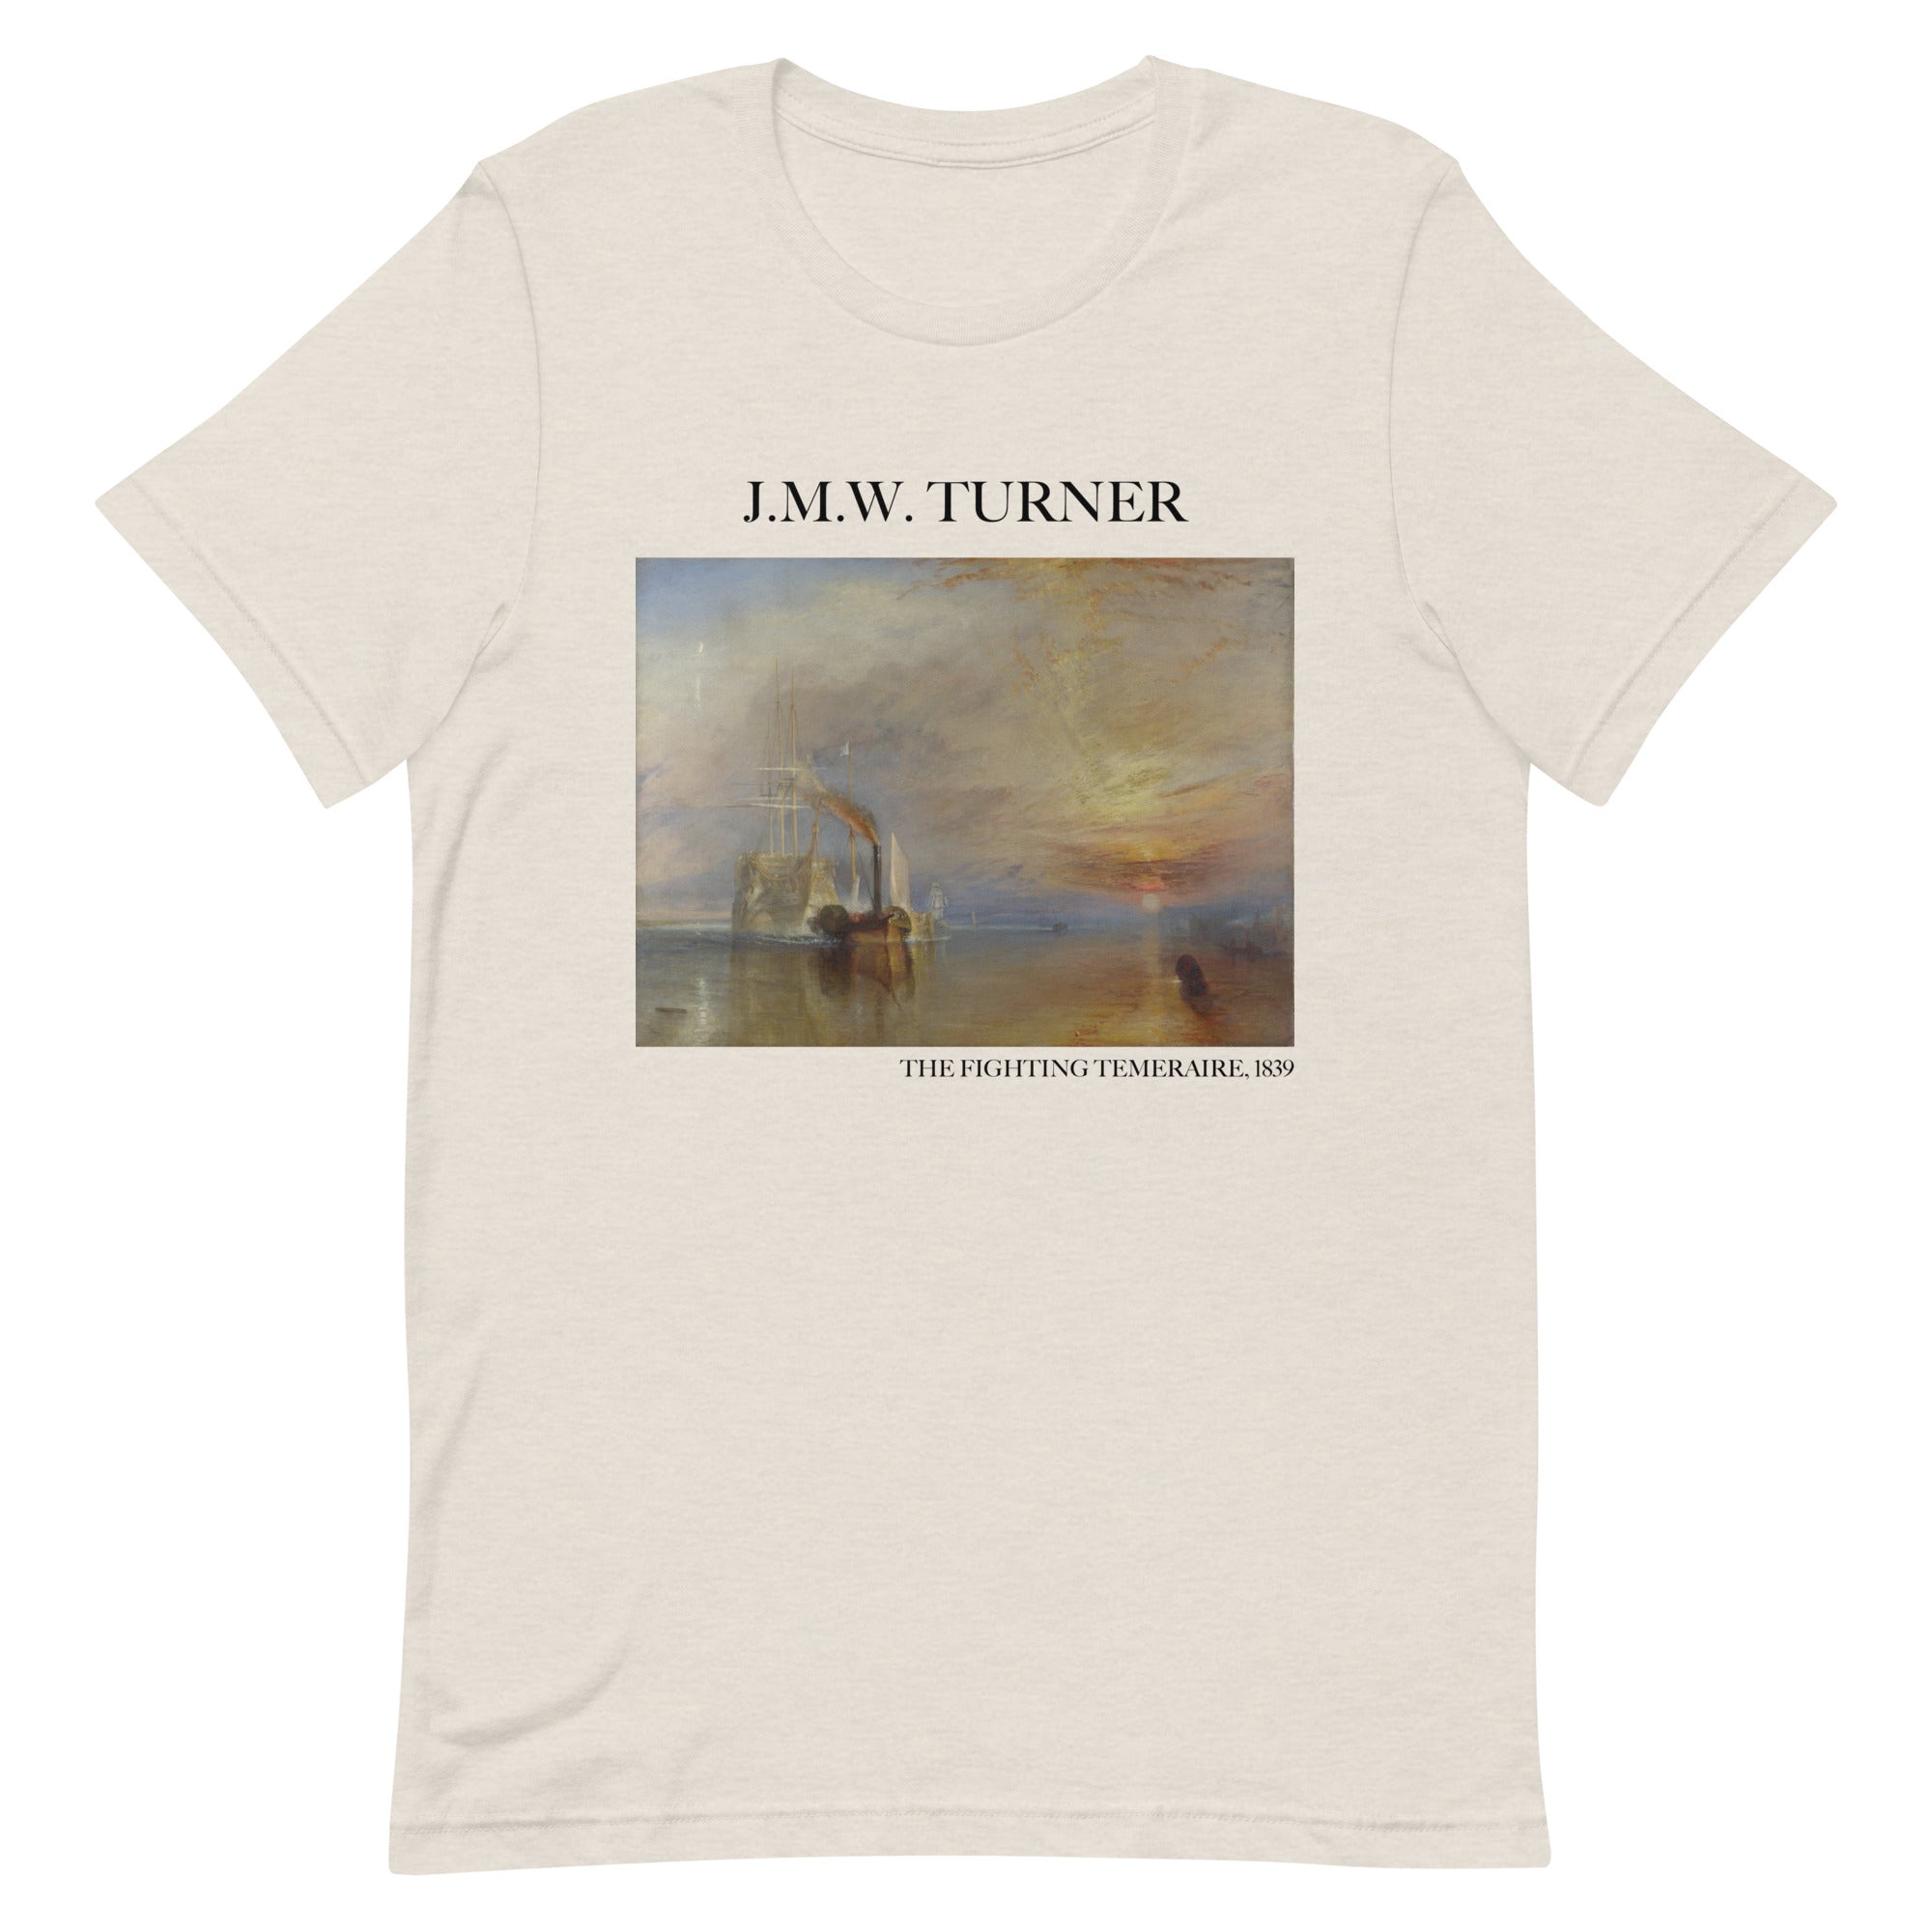 J.M.W. Turner 'The Fighting Temeraire' Famous Painting T-Shirt | Unisex Classic Art Tee